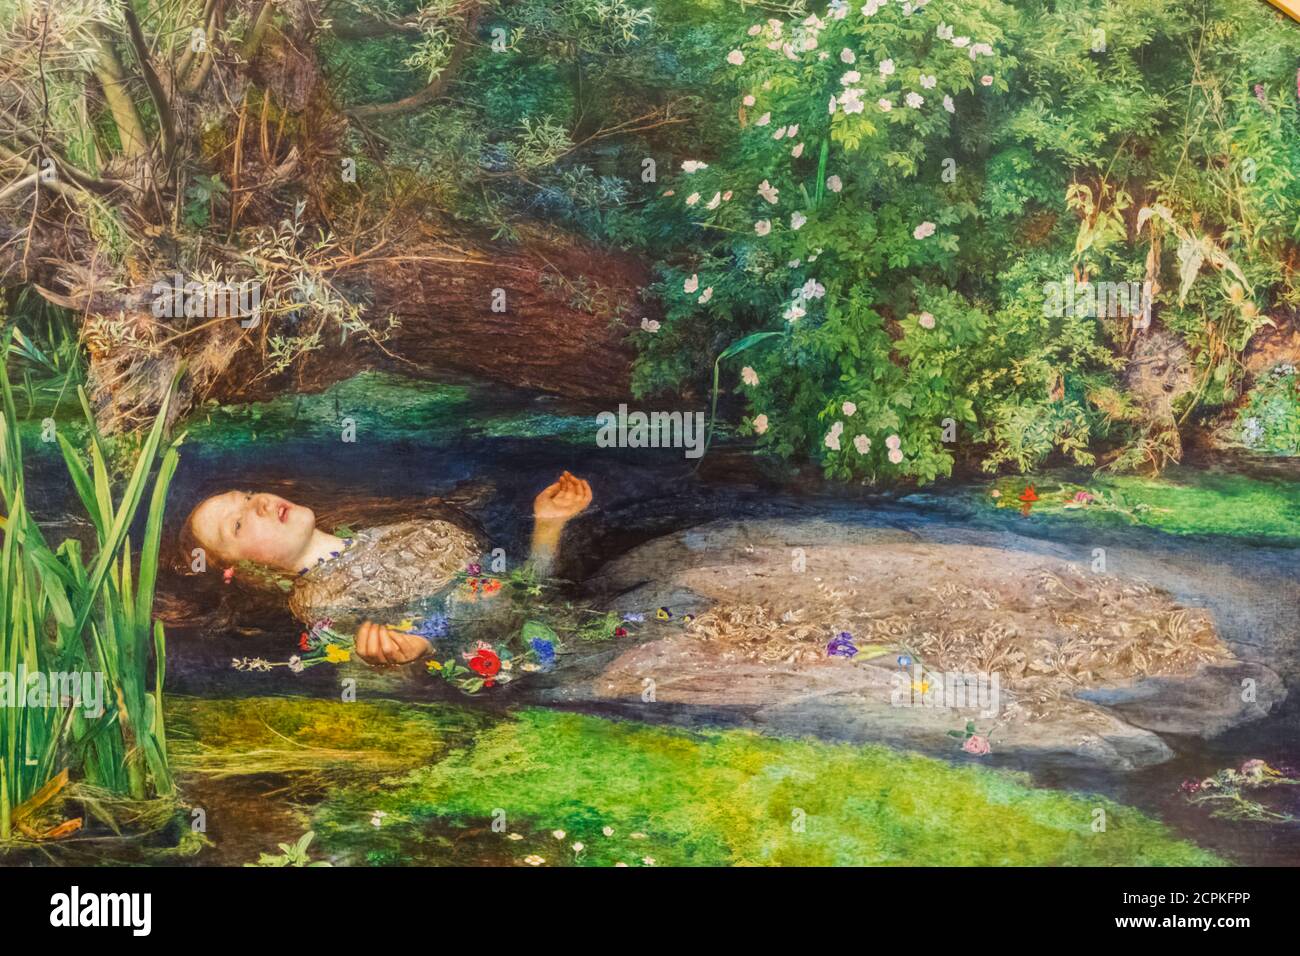 Painting titled 'Ophelia' by John Everett Millais dated 1851 Stock Photo